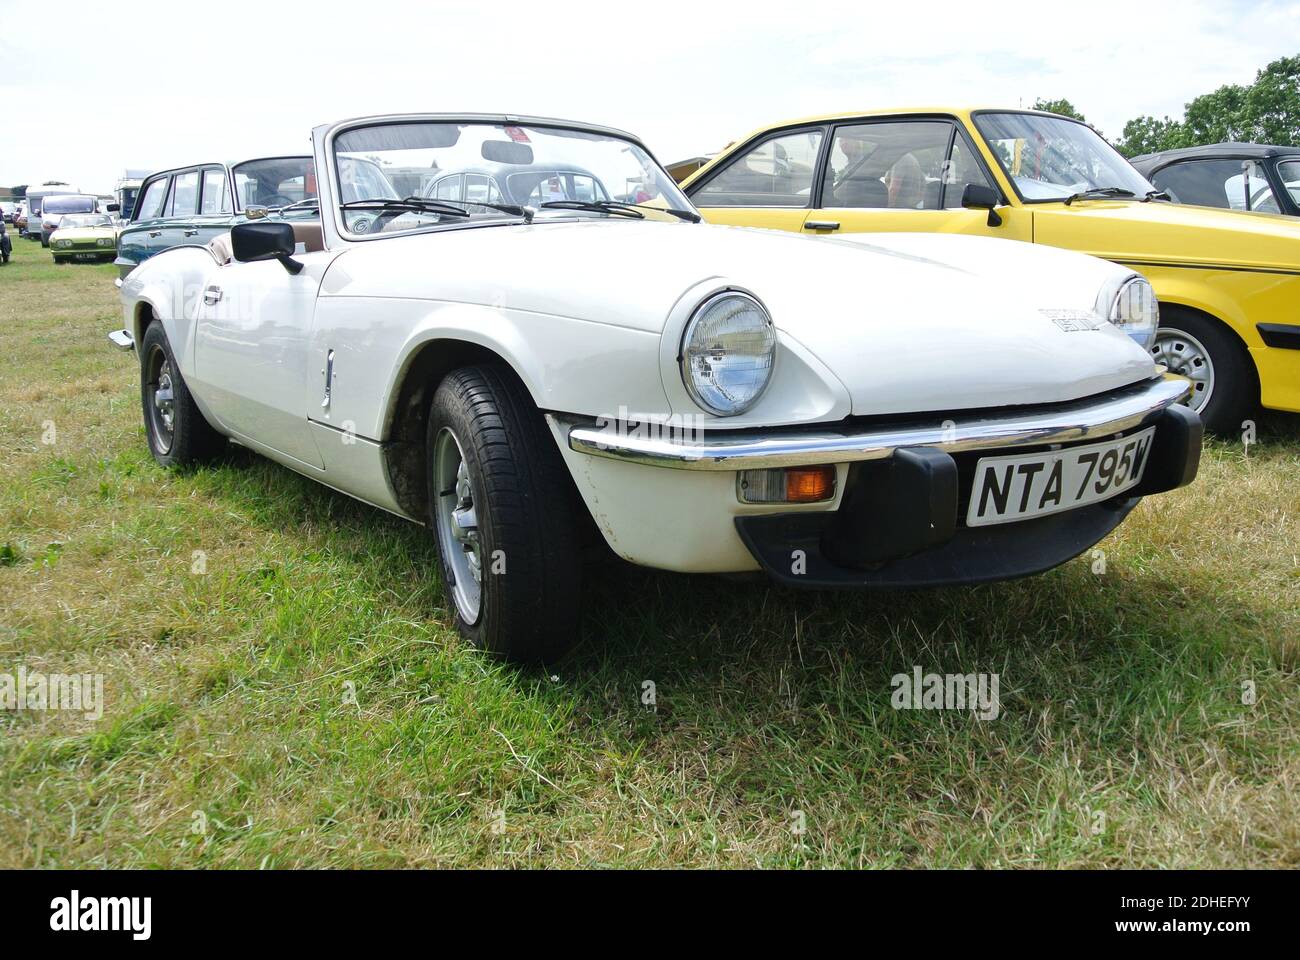 A 1981 Triumph Spitfire classic car parked up on display at the Torbay Steam Fair, Churston, Devon, England, UK. Stock Photo